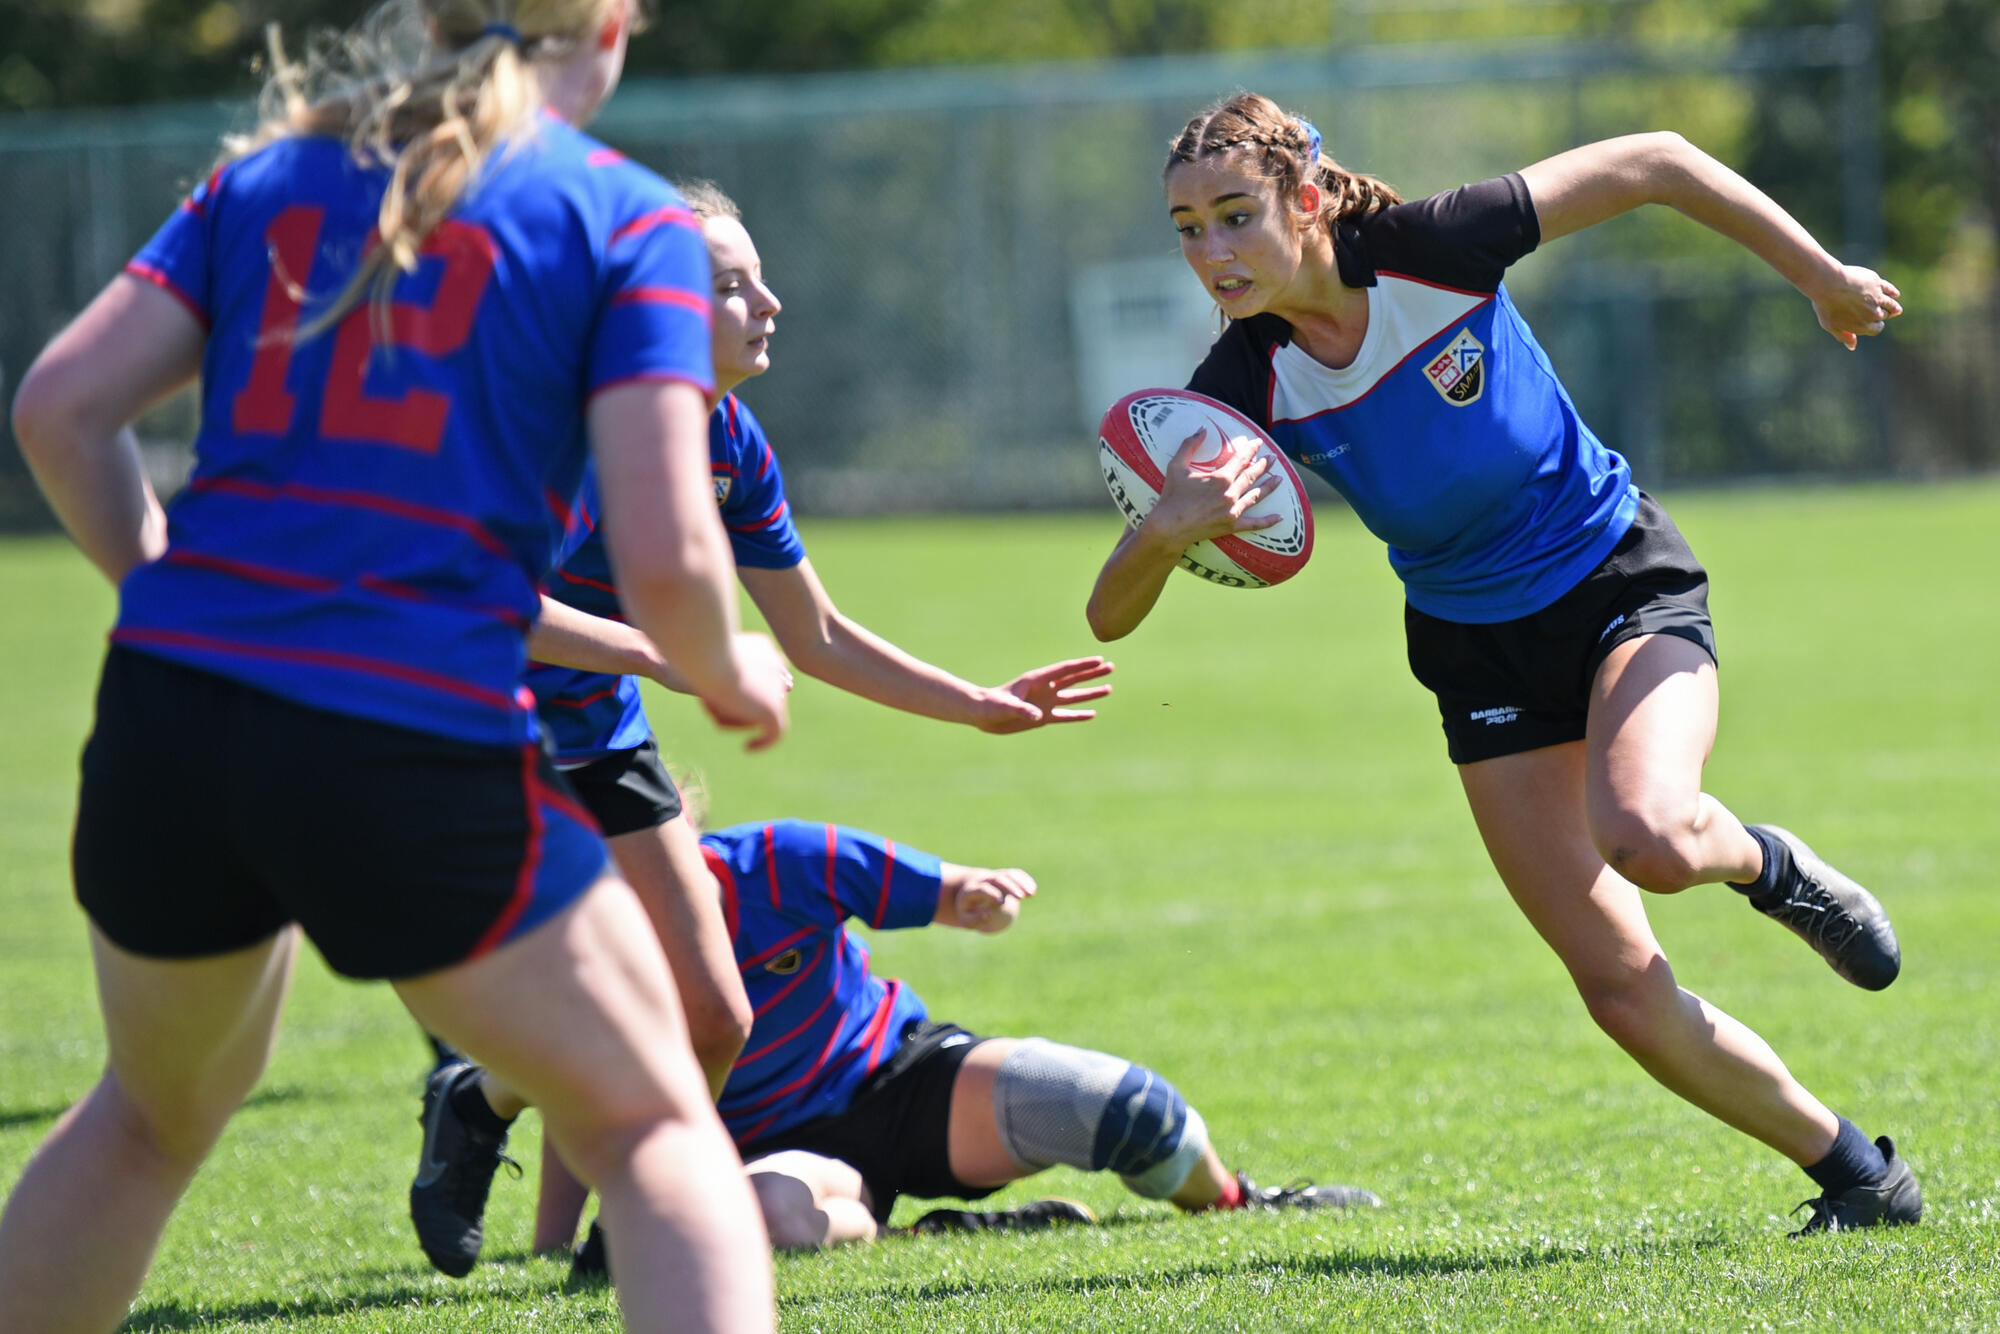 A member of the Girls Rugby team runs with the ball